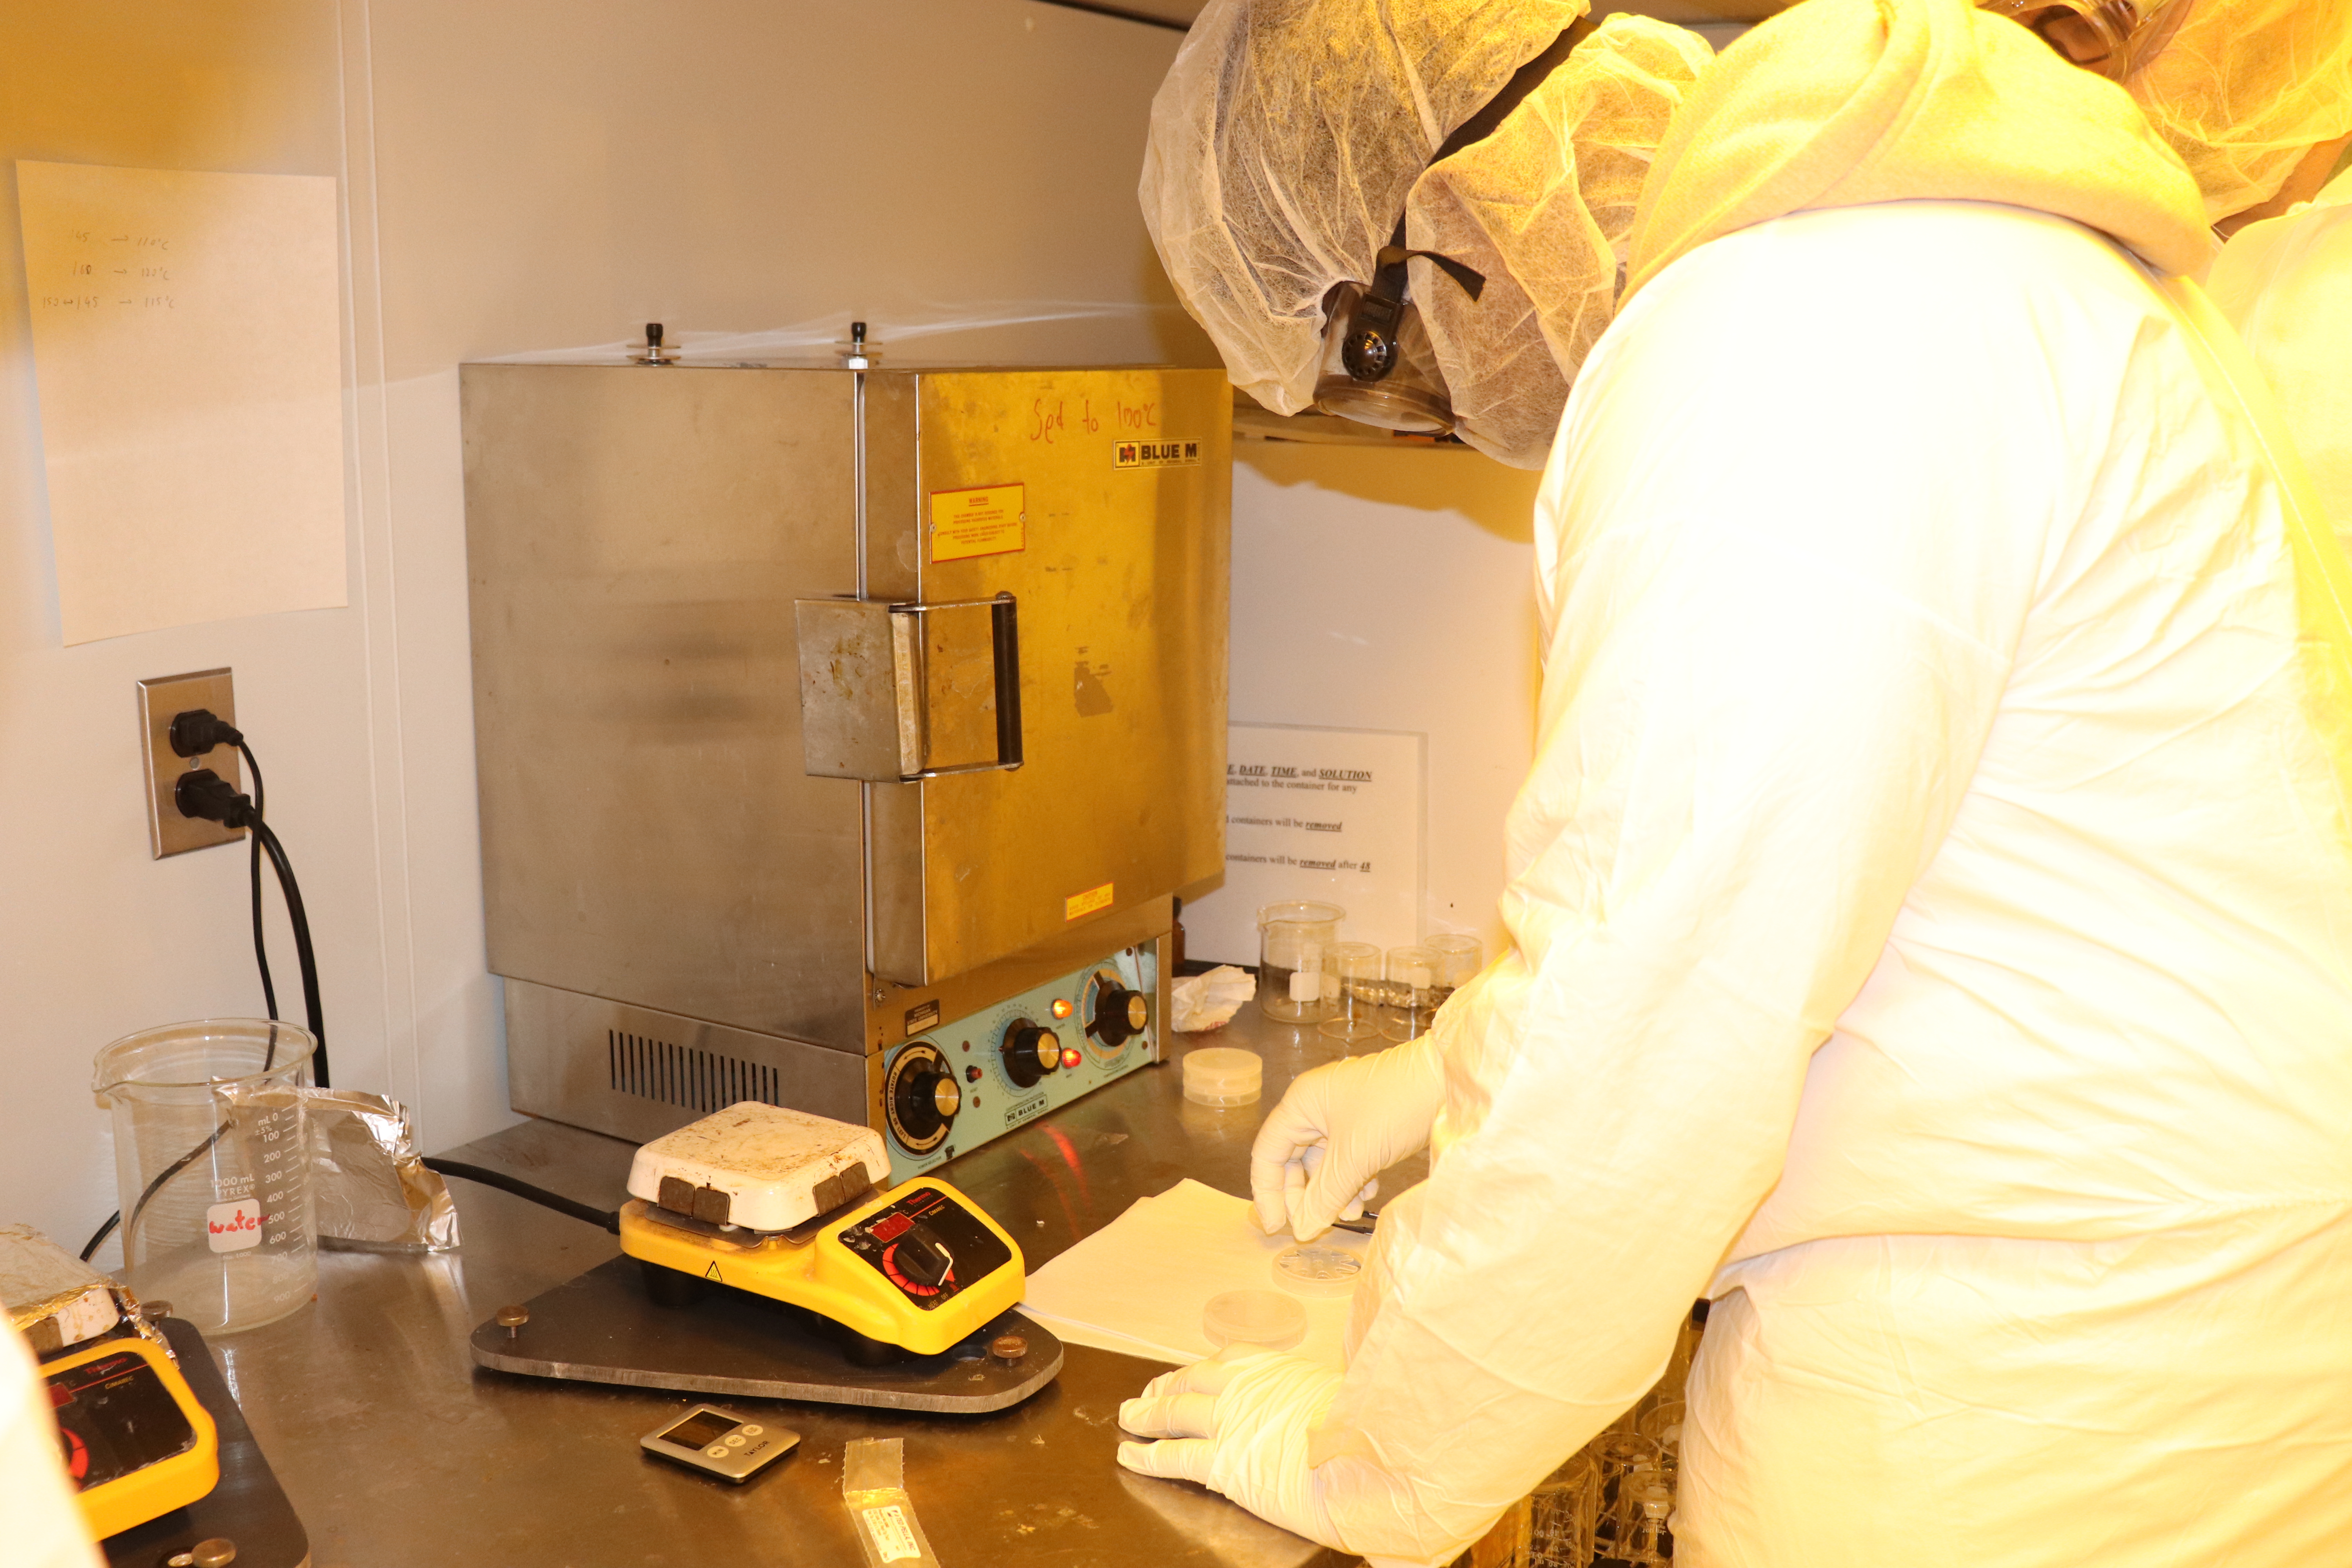 Ninth graders worked in a clean room at Semiconductor Camp